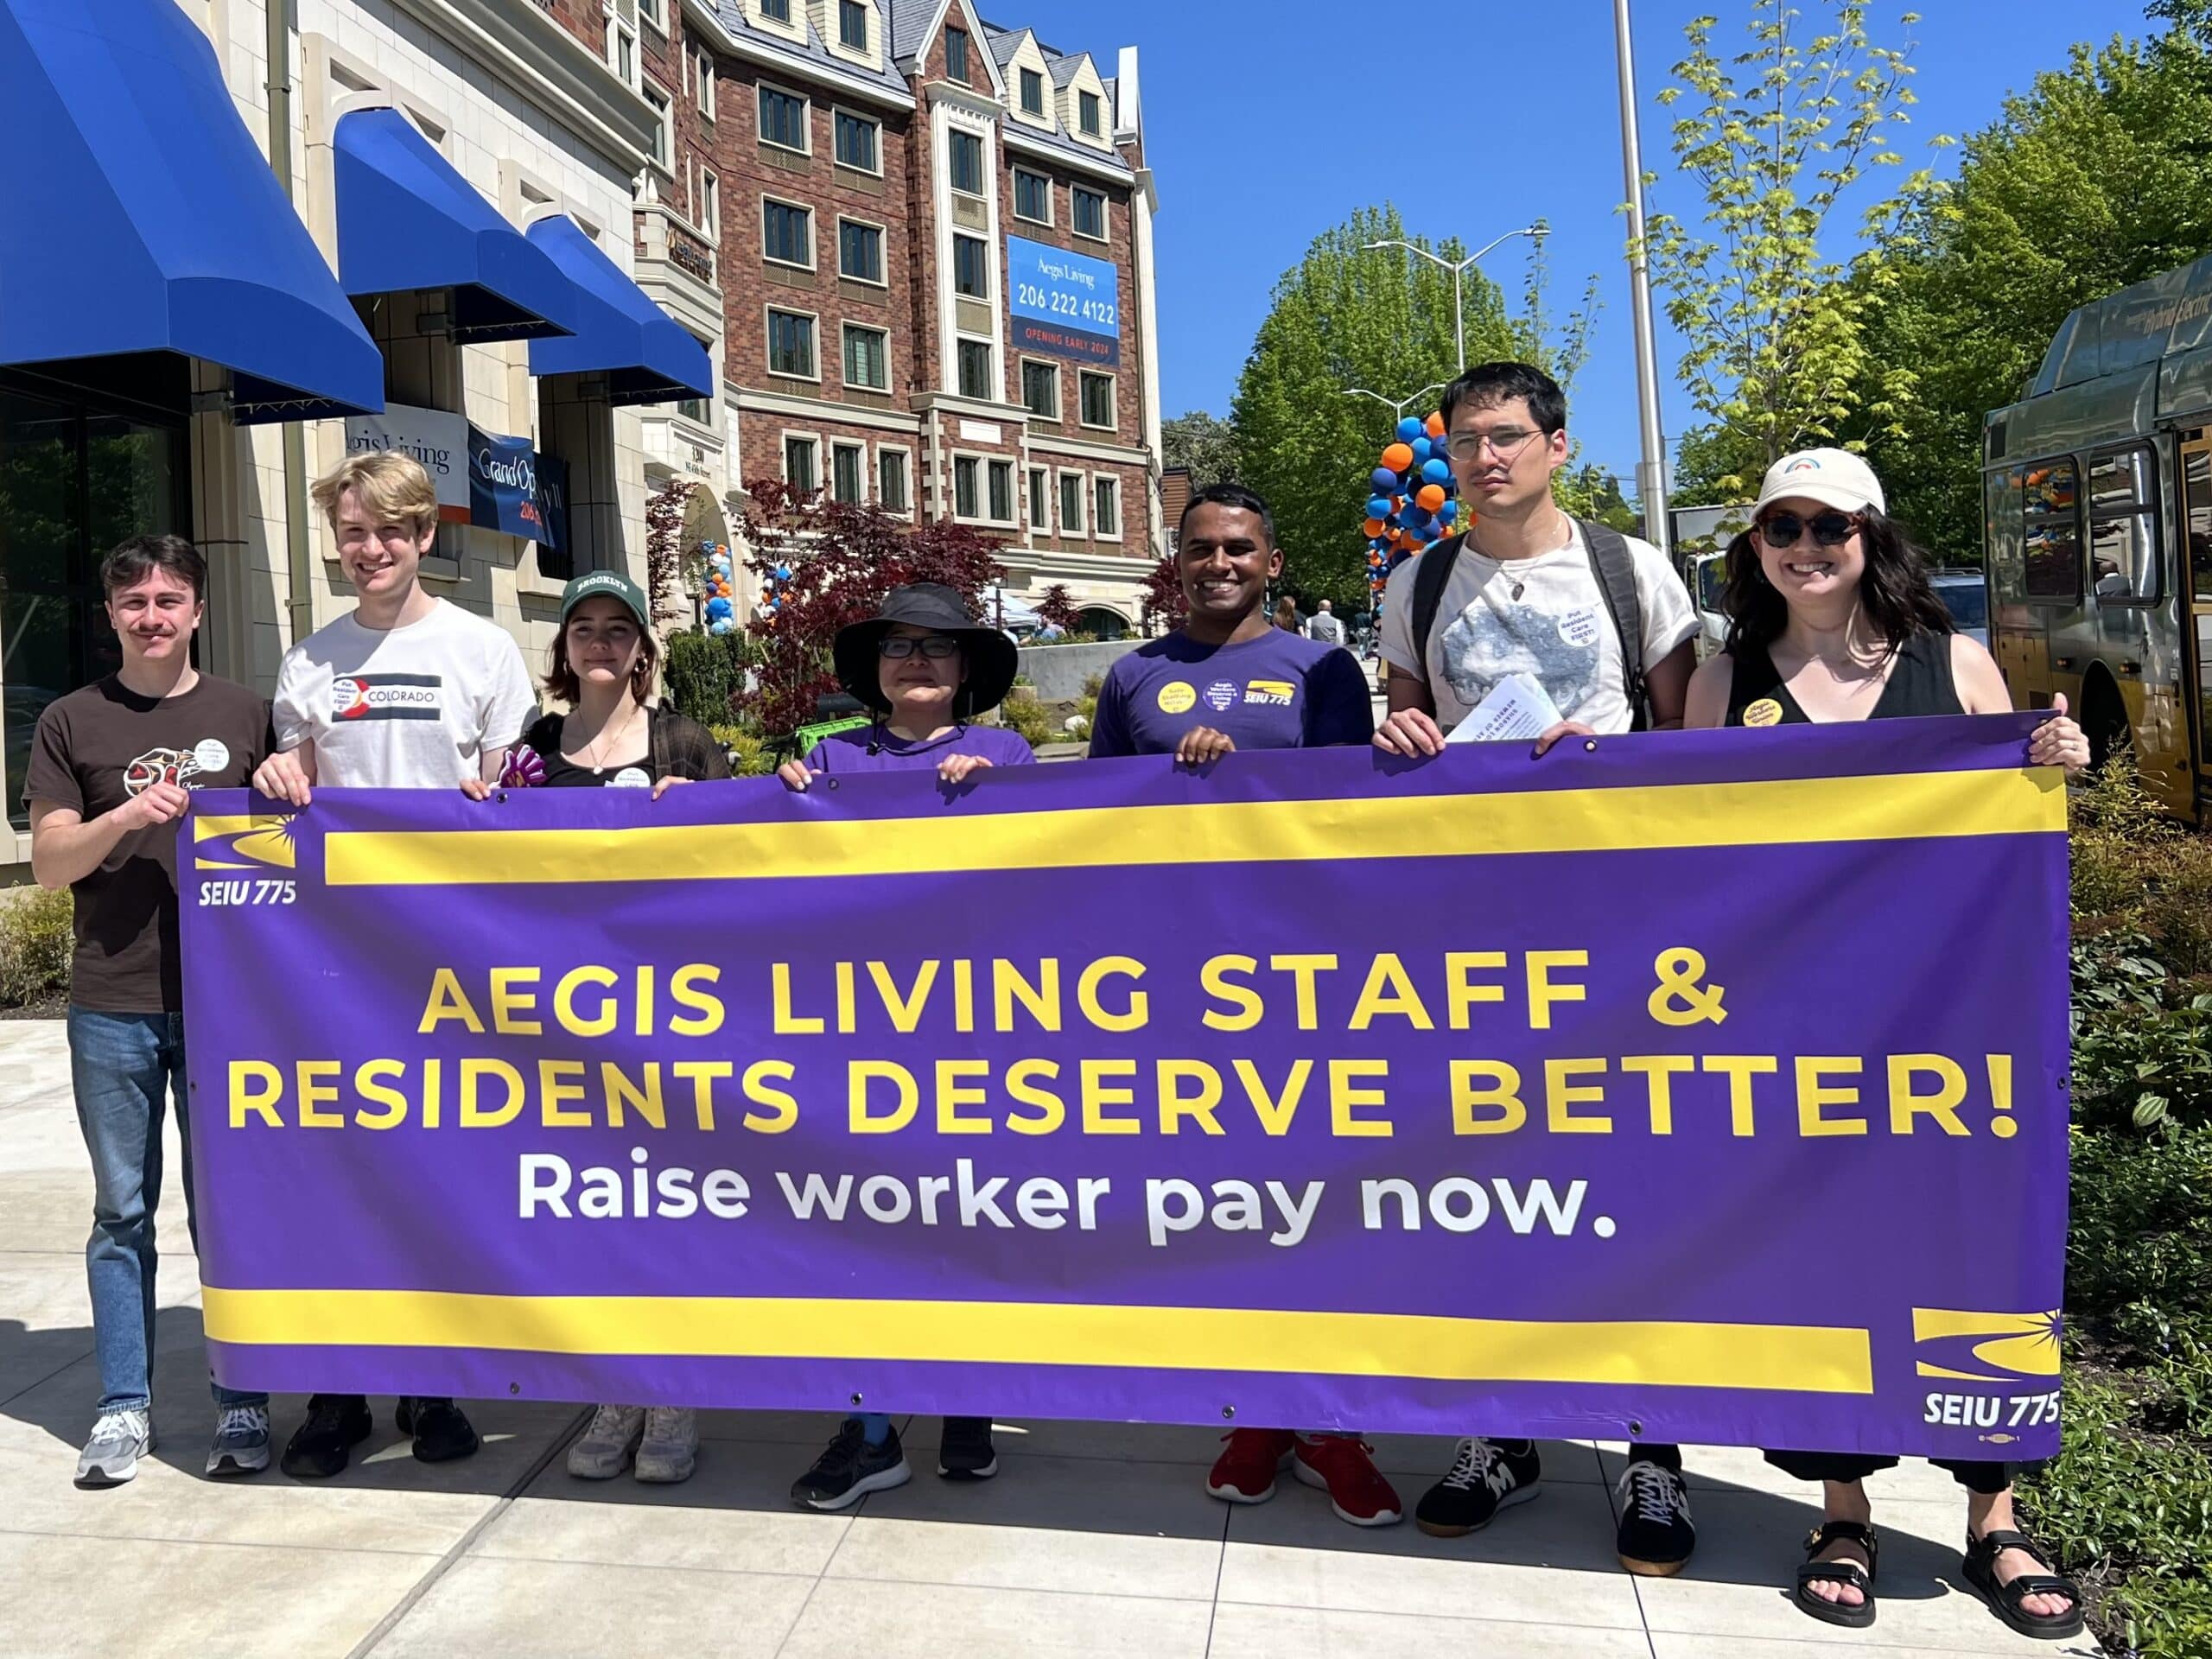 Workers at Aegis Living hold a sign that says "Aegis Living Staff and Residents Deserve Better"